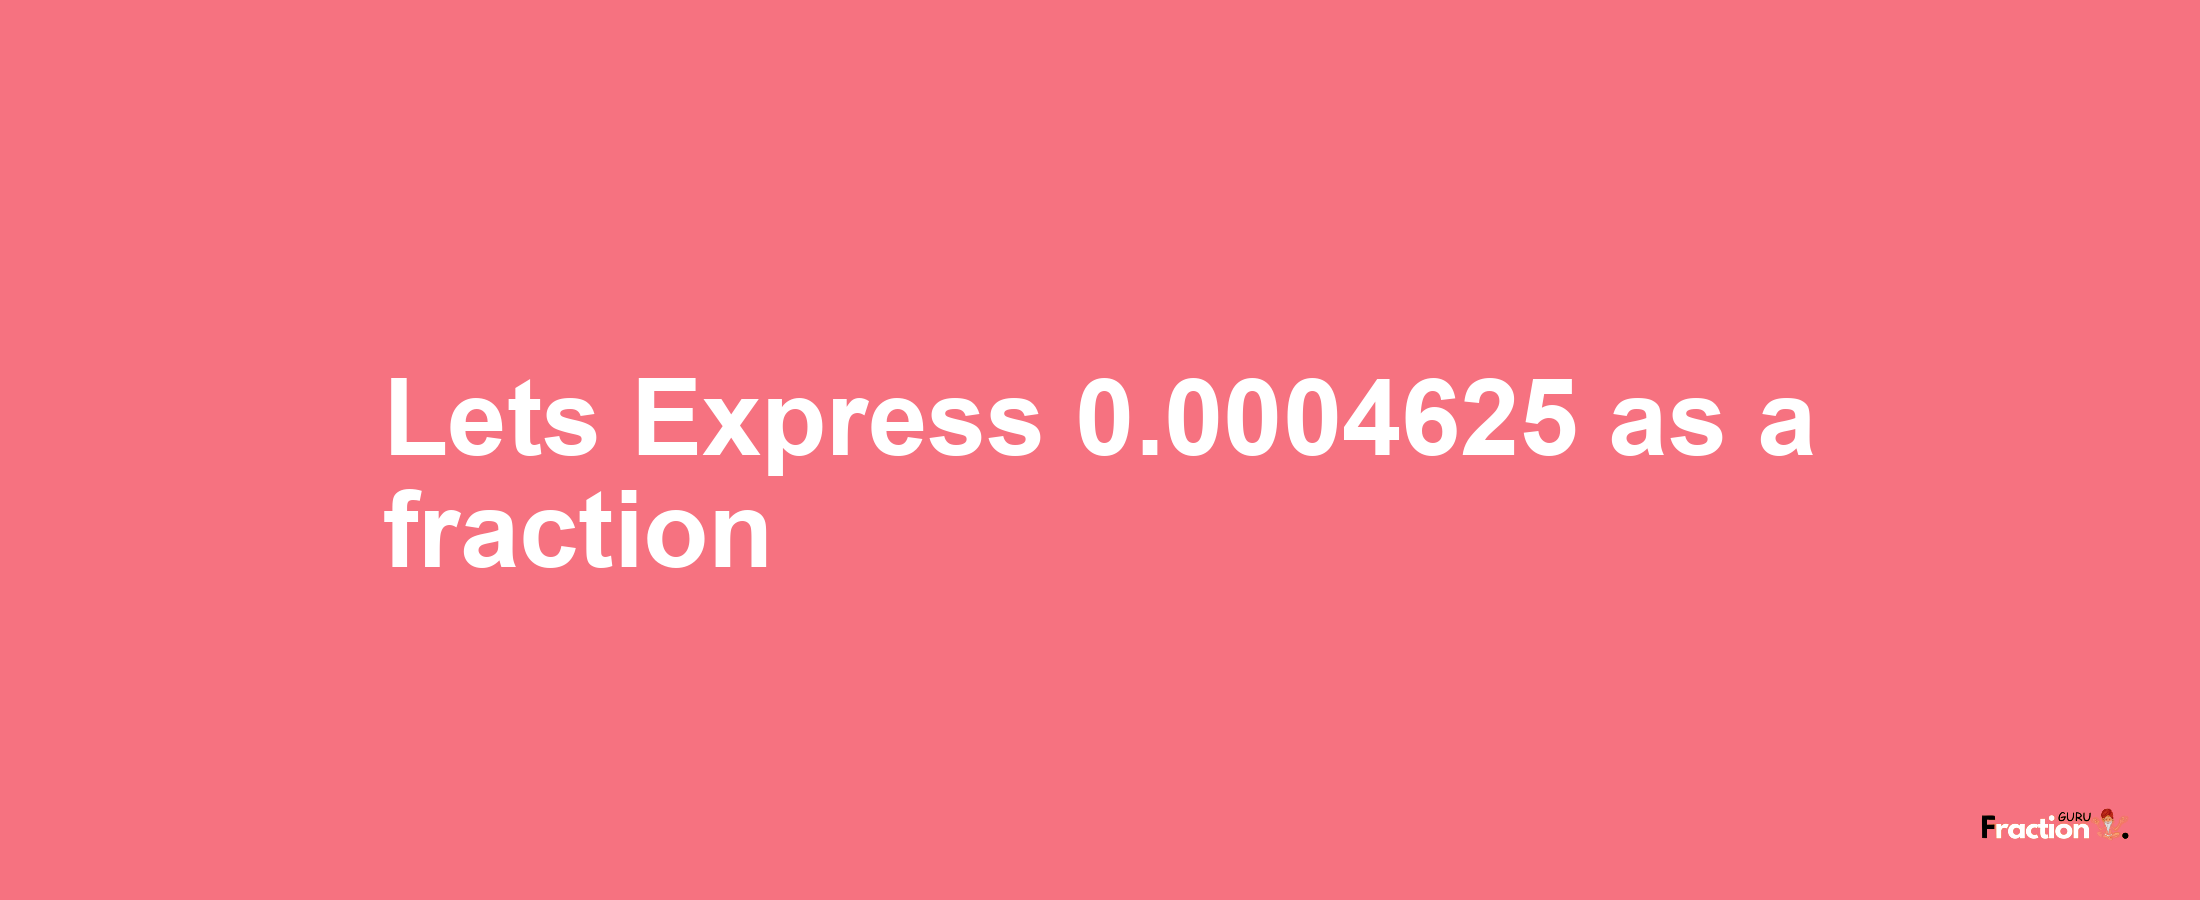 Lets Express 0.0004625 as afraction